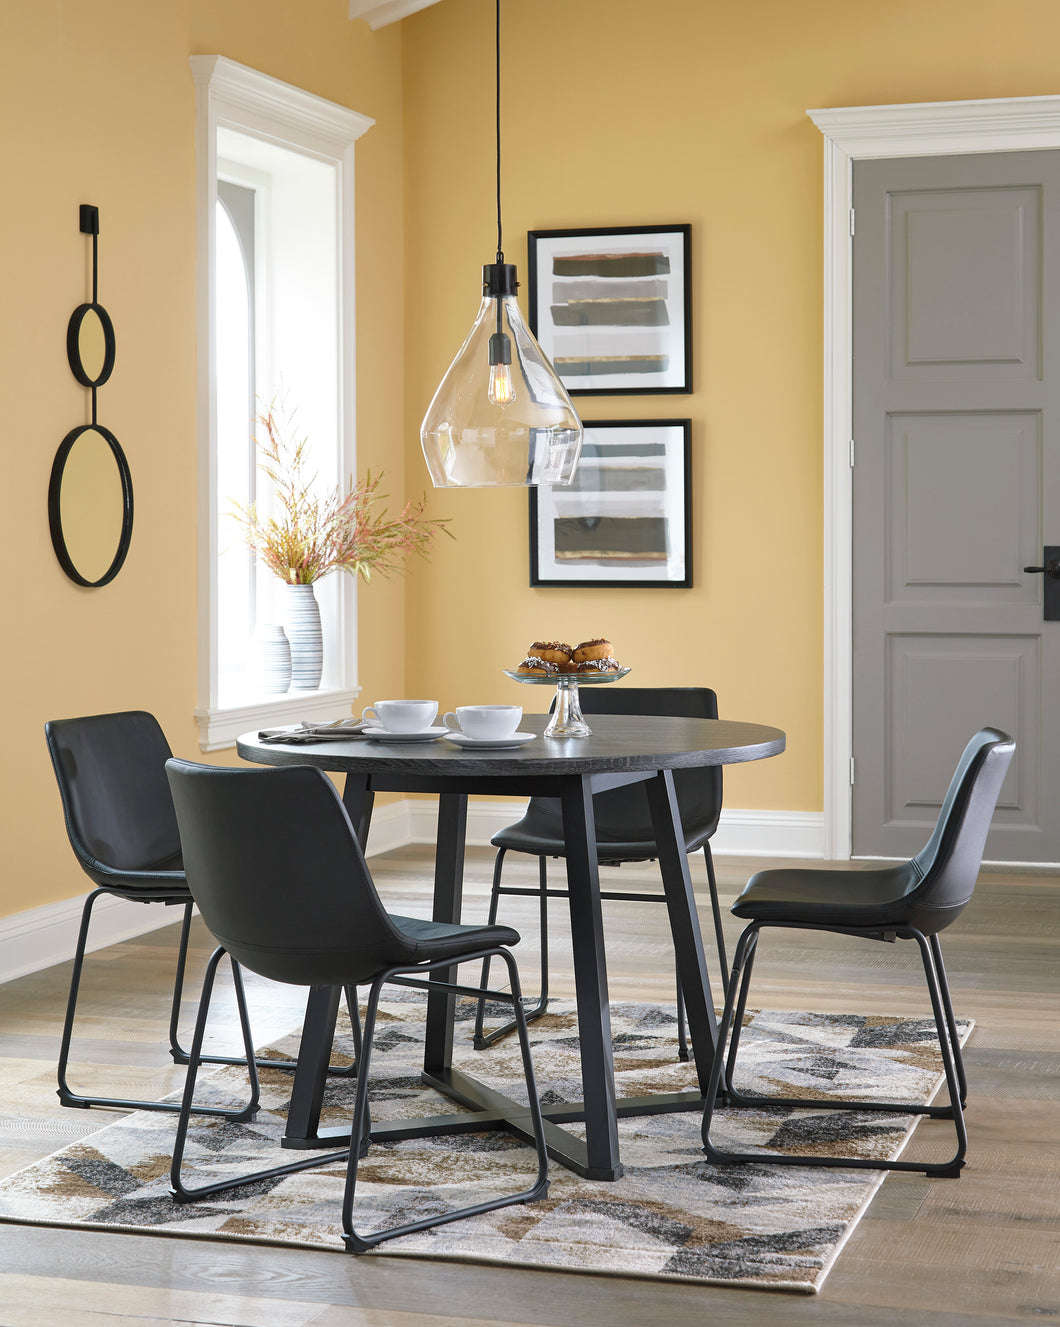 Centiar 5 Piece Round Table & Chairs